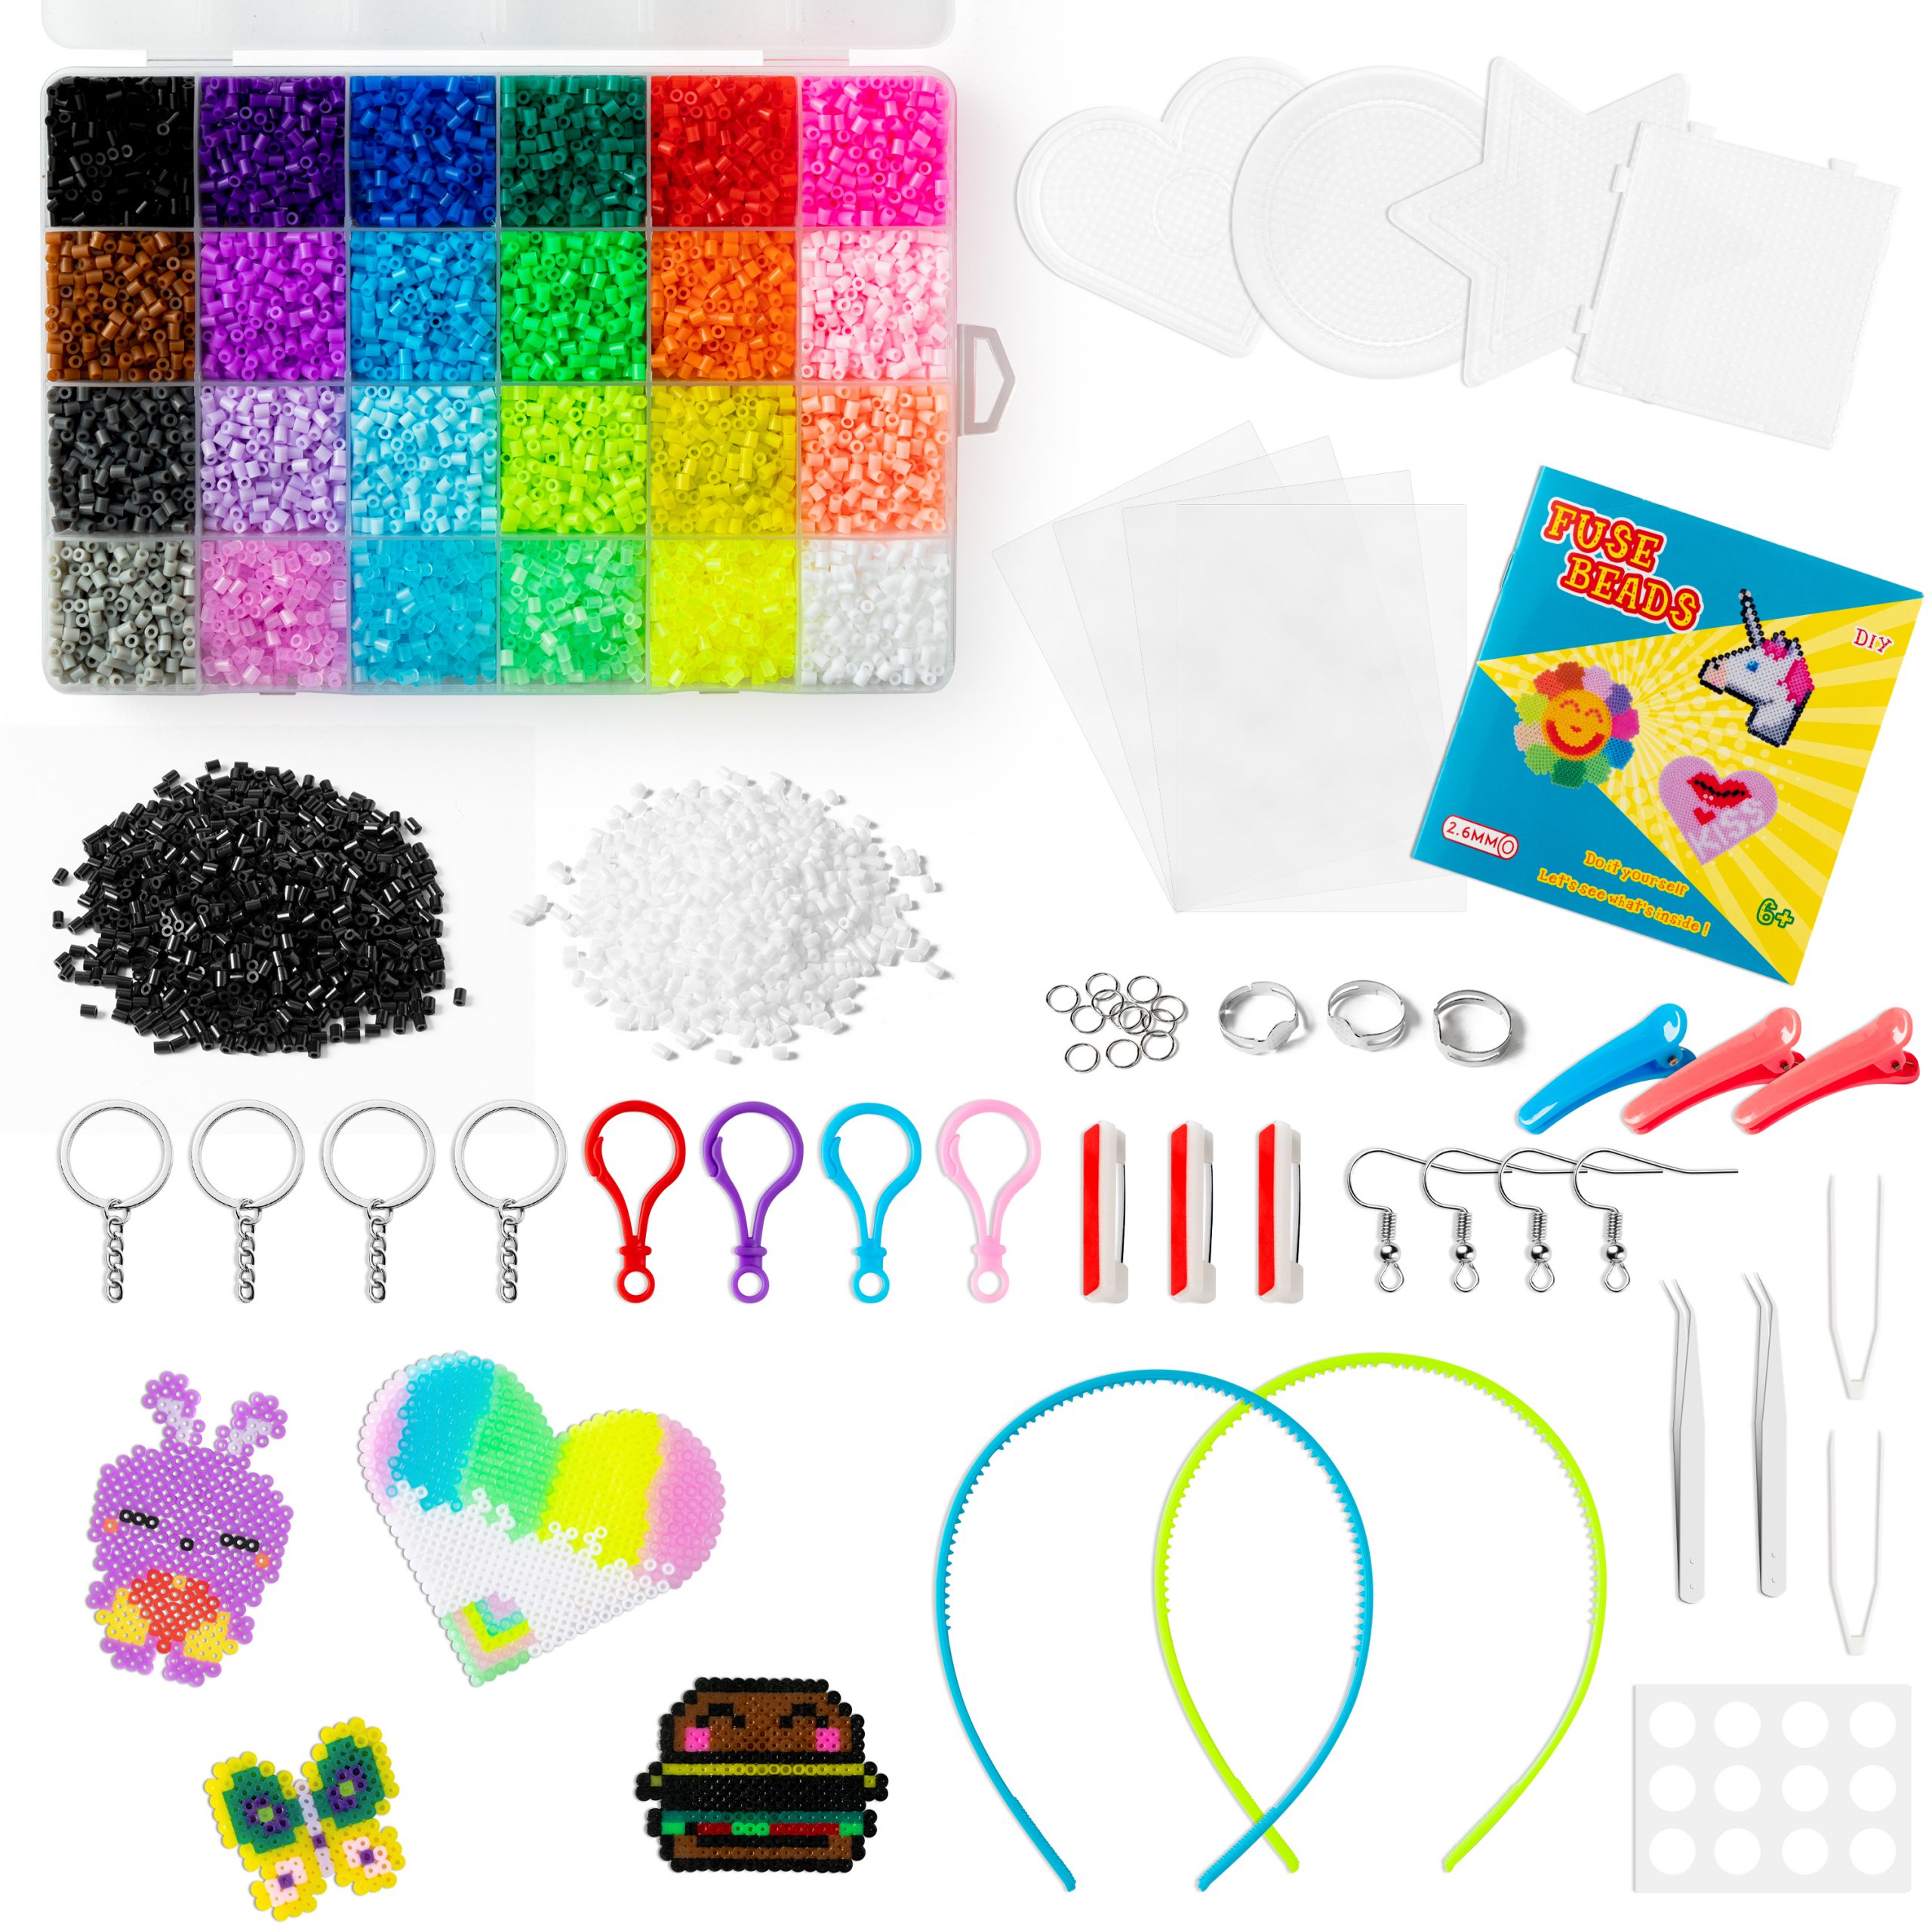 BUoonyer 17060Pcs Mini Fuse Beads Kit, Melting Beads Set for Kids Crafts,  Including 24 Colors 2.6mm Iron Beads, Pegboards, Ironing Papers, Tweezers,  Keychains, Hair Clips, Etc. Making Arts DIY Gift – BUoonyer